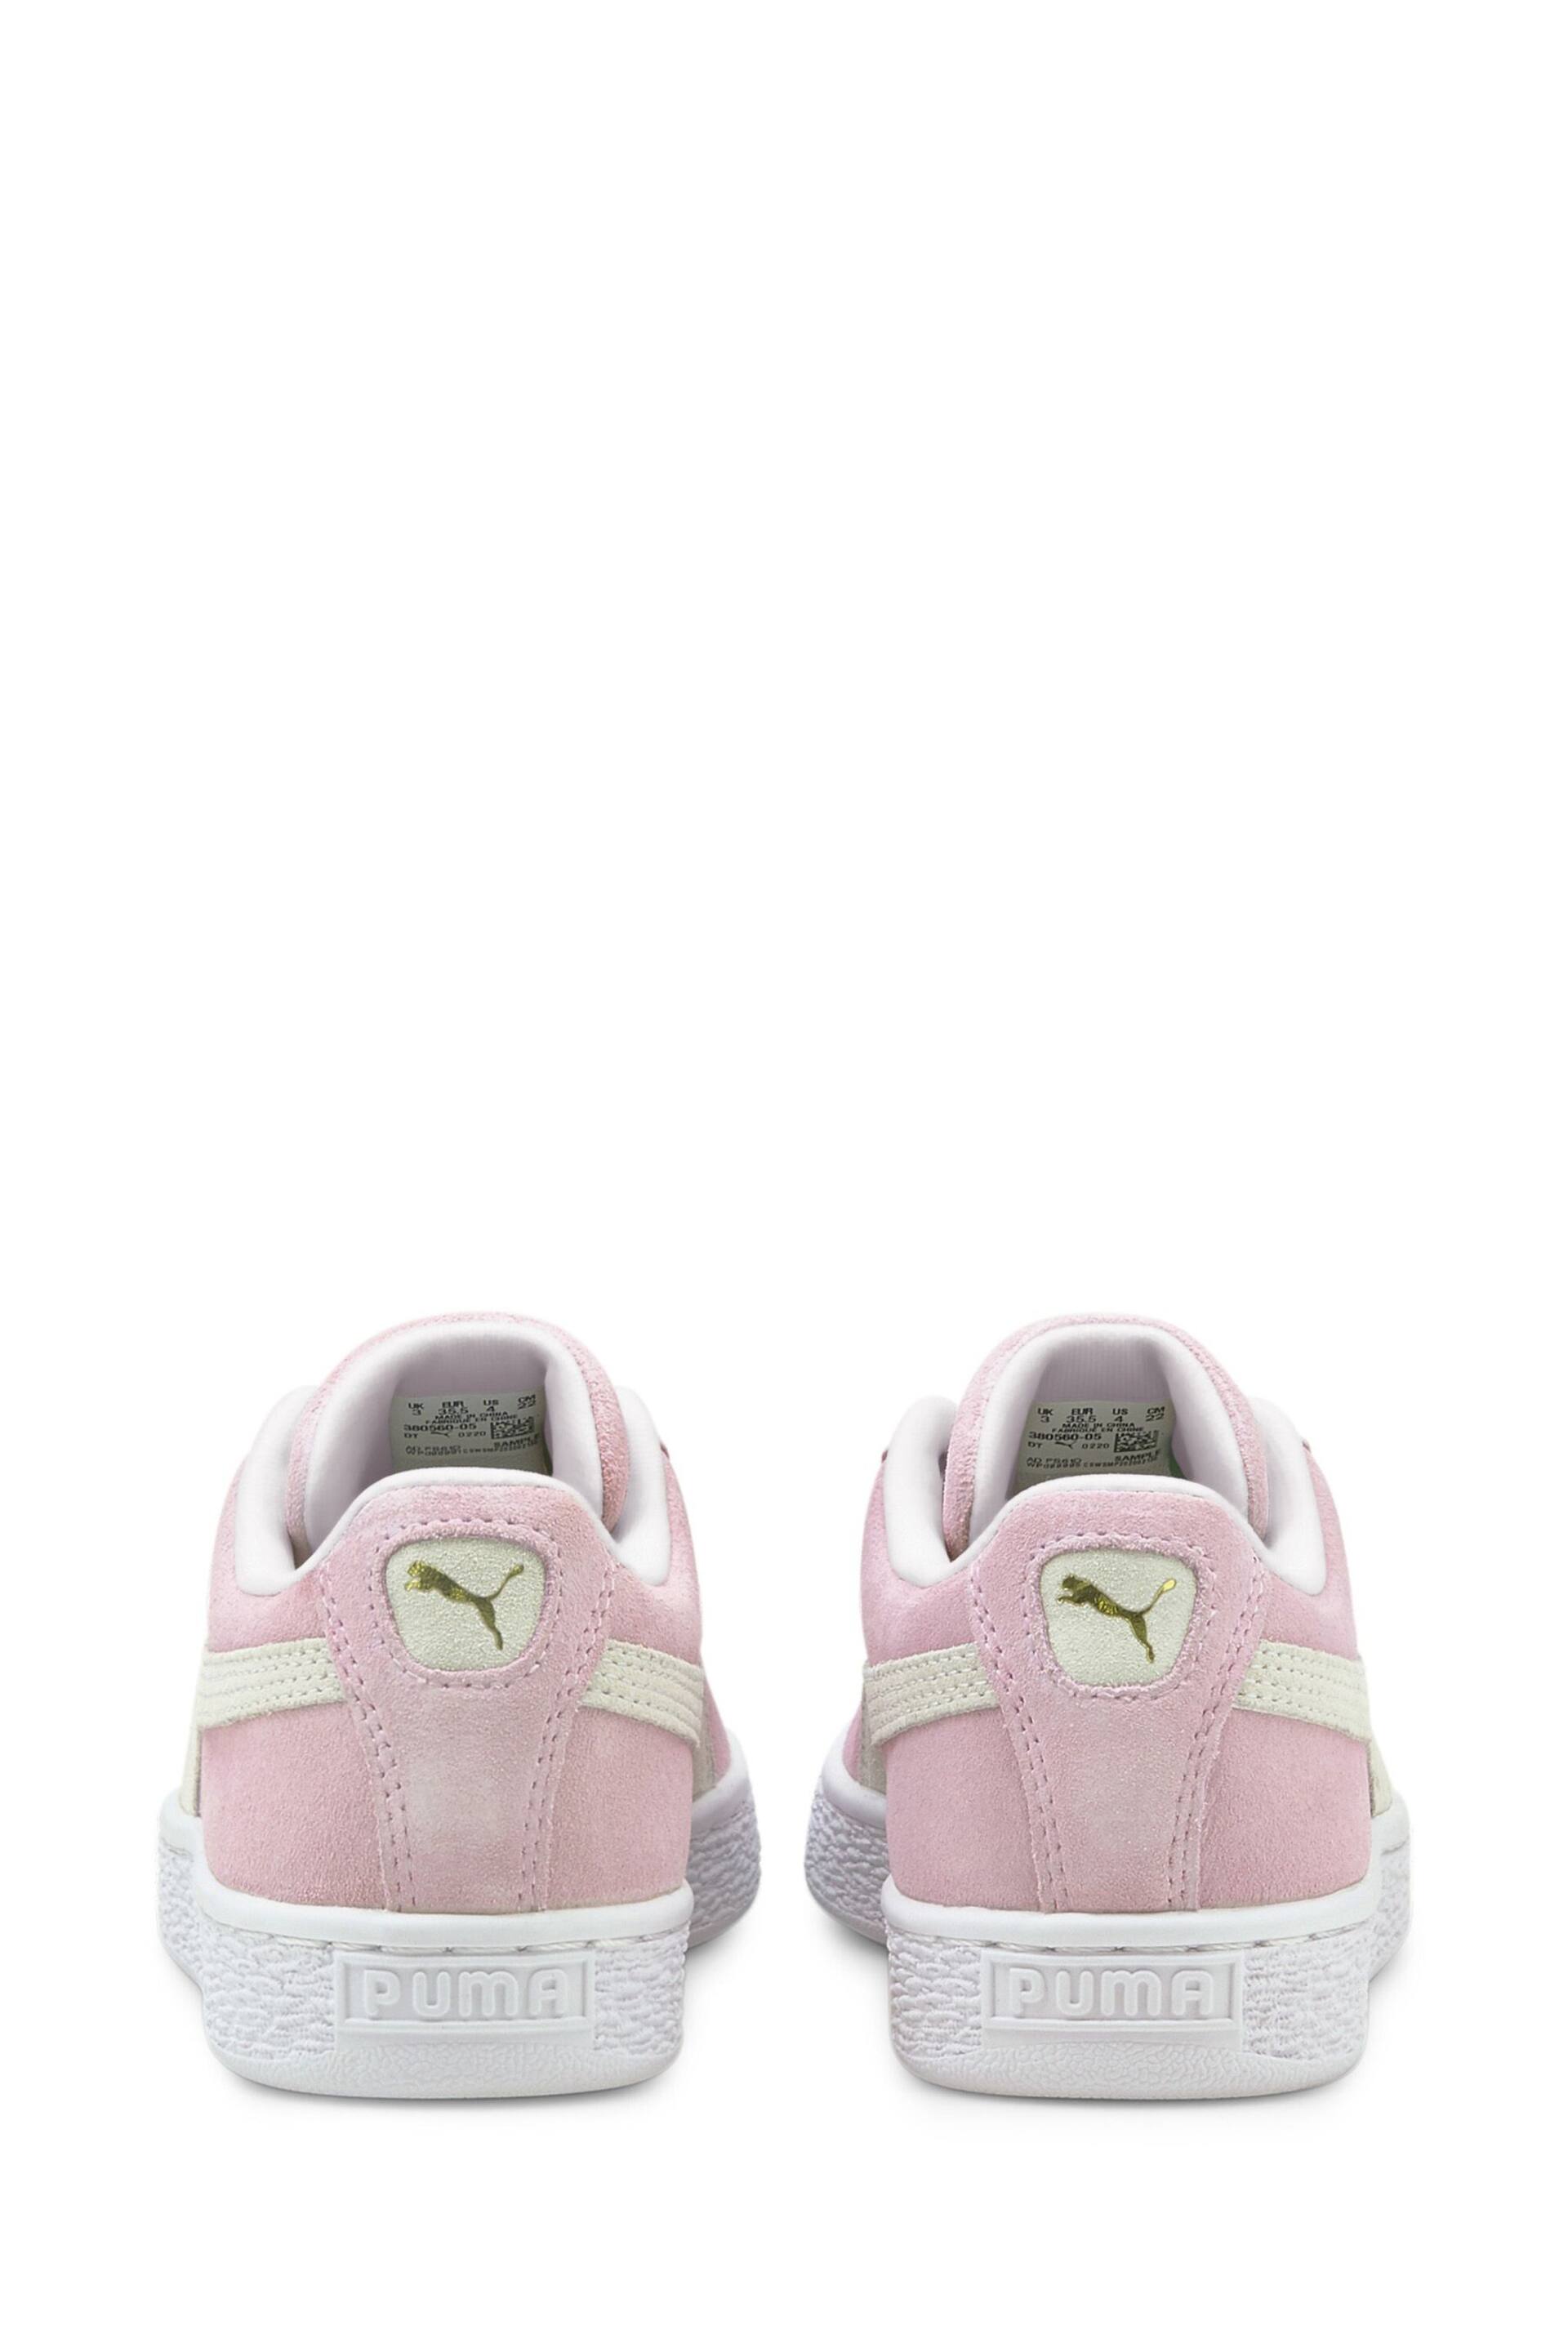 Puma Pink Suede Classic XXI Youth Trainers - Image 5 of 7